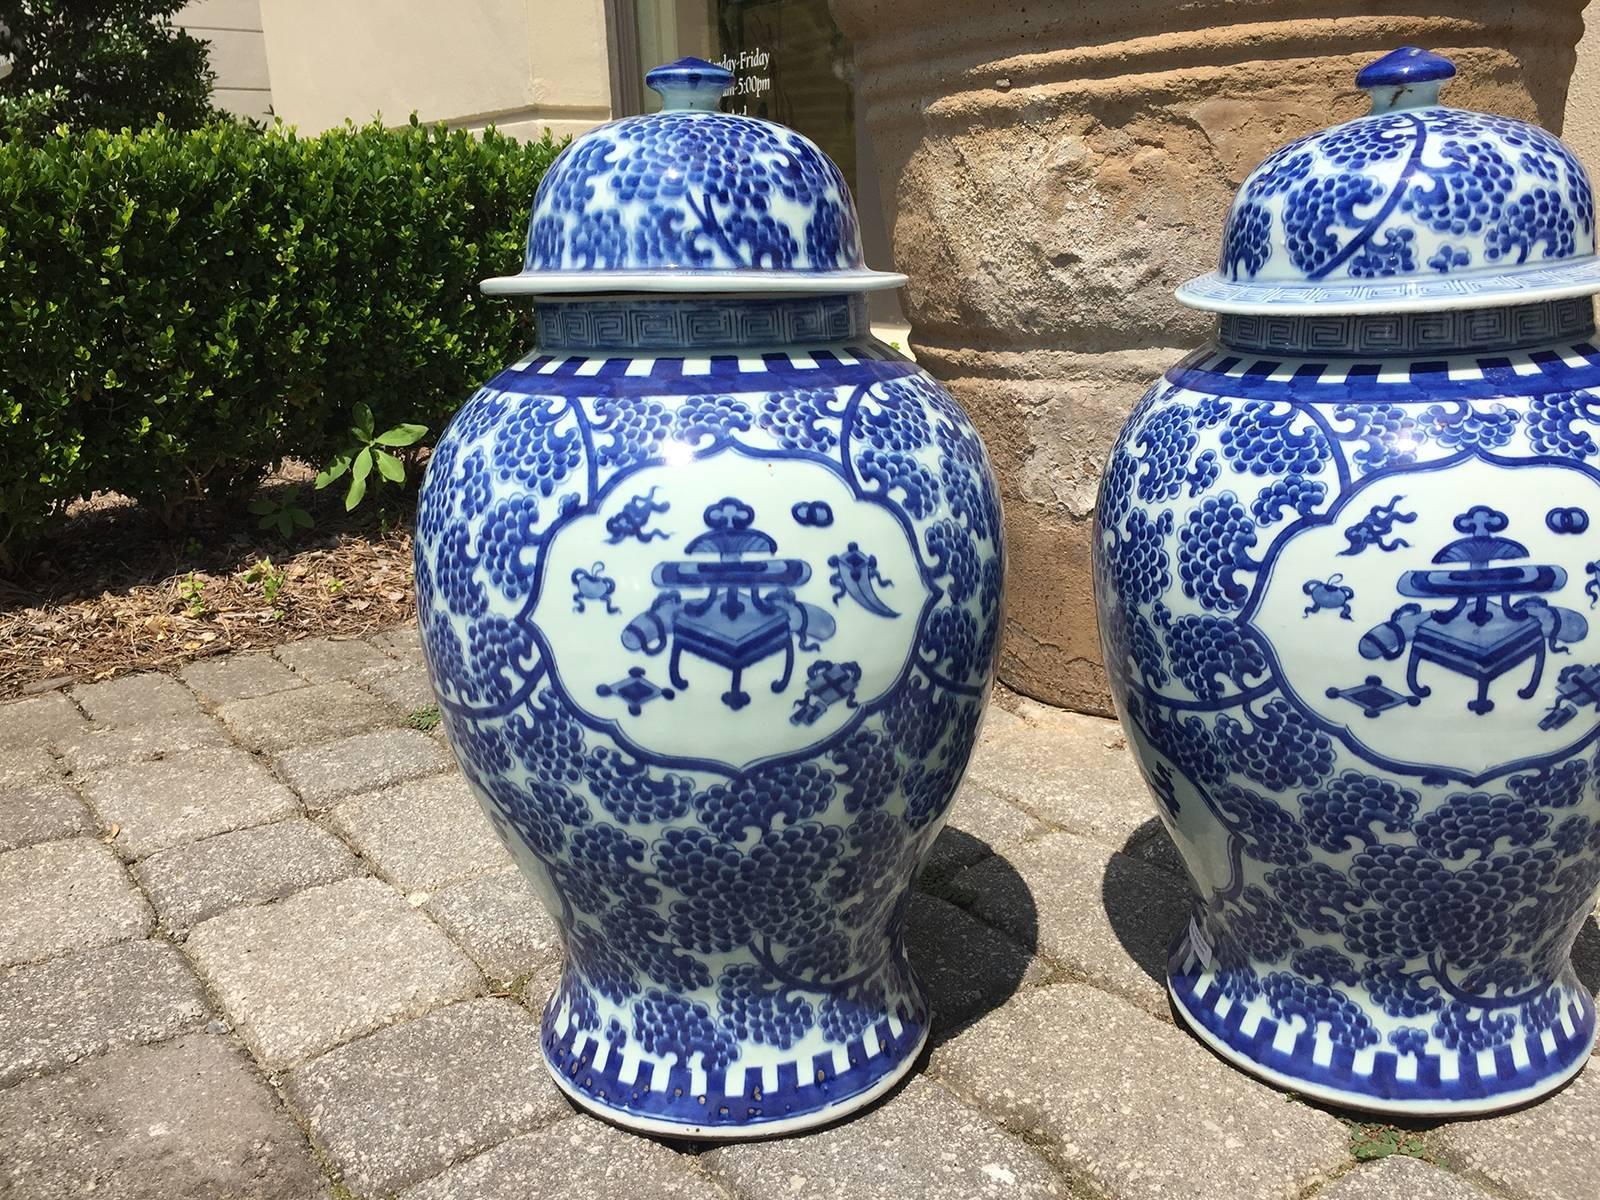 Pair of 19th century blue and white Chinese export jars.